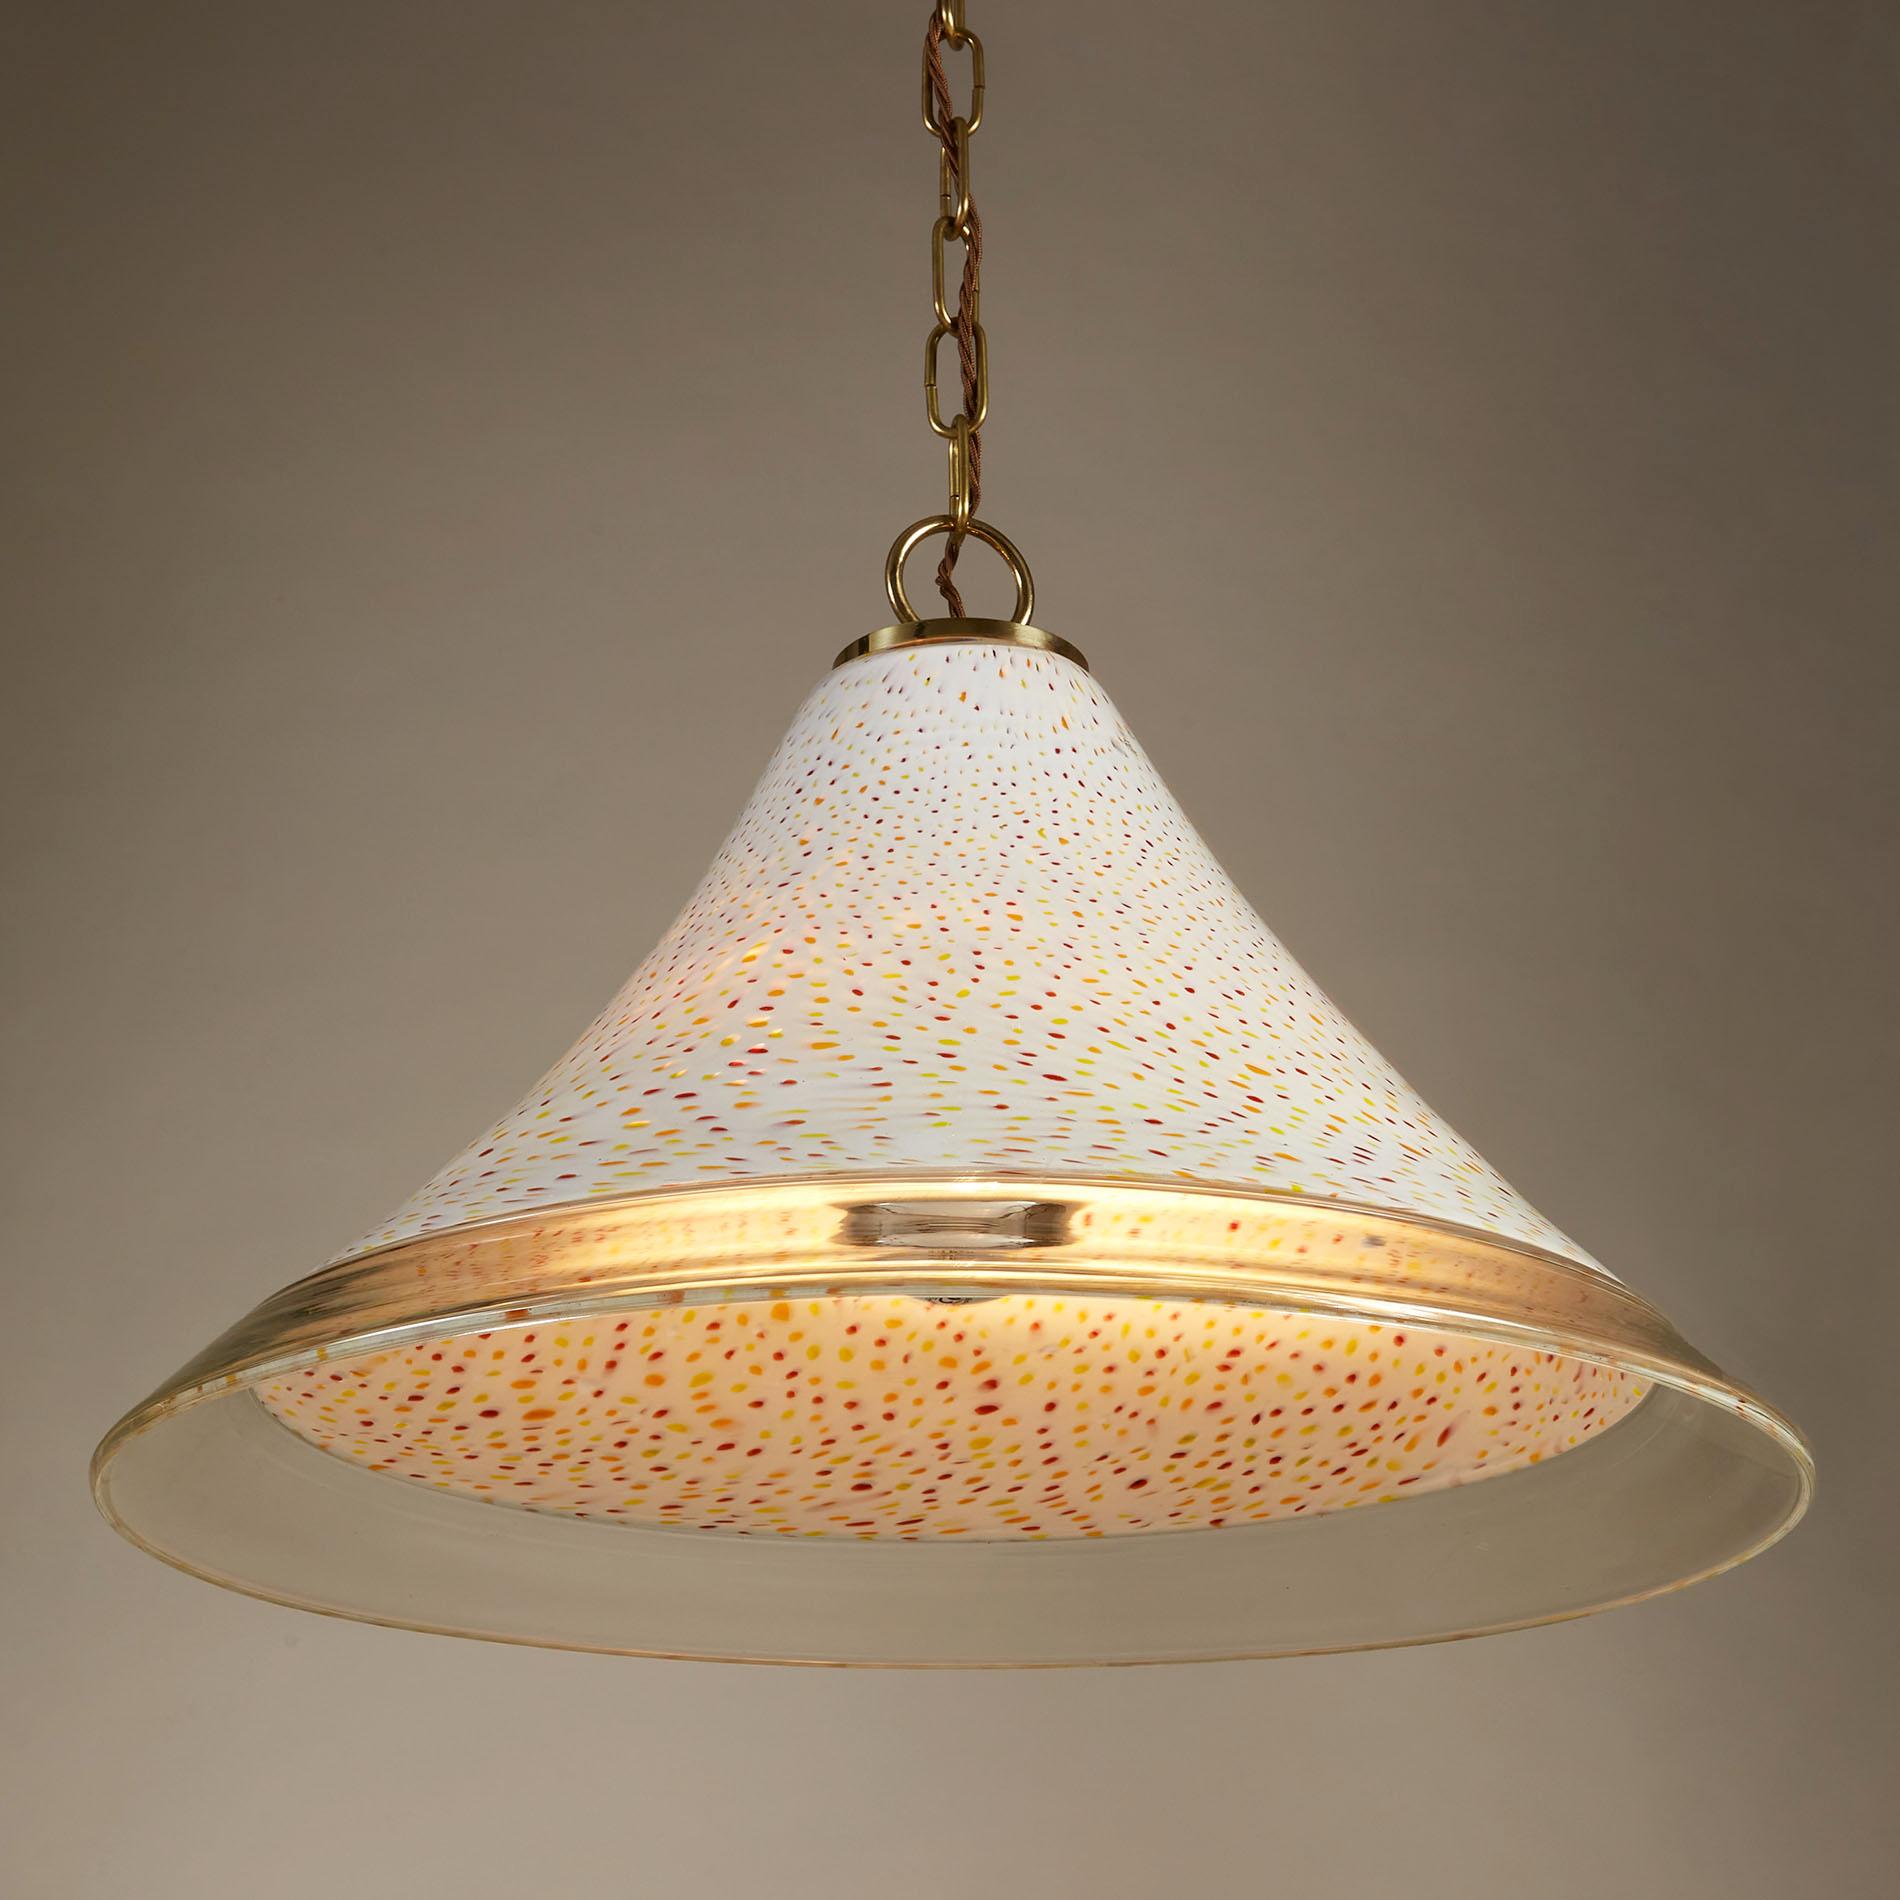 Murano glass conical shade dramatically speckled in red, orange and yellow over a smooth white ground – contemporary brass fittings. 

Two available

Re-wired and PAT tested.

Measures: 33cm drop (excl. chain) x 52cm diameter. each.